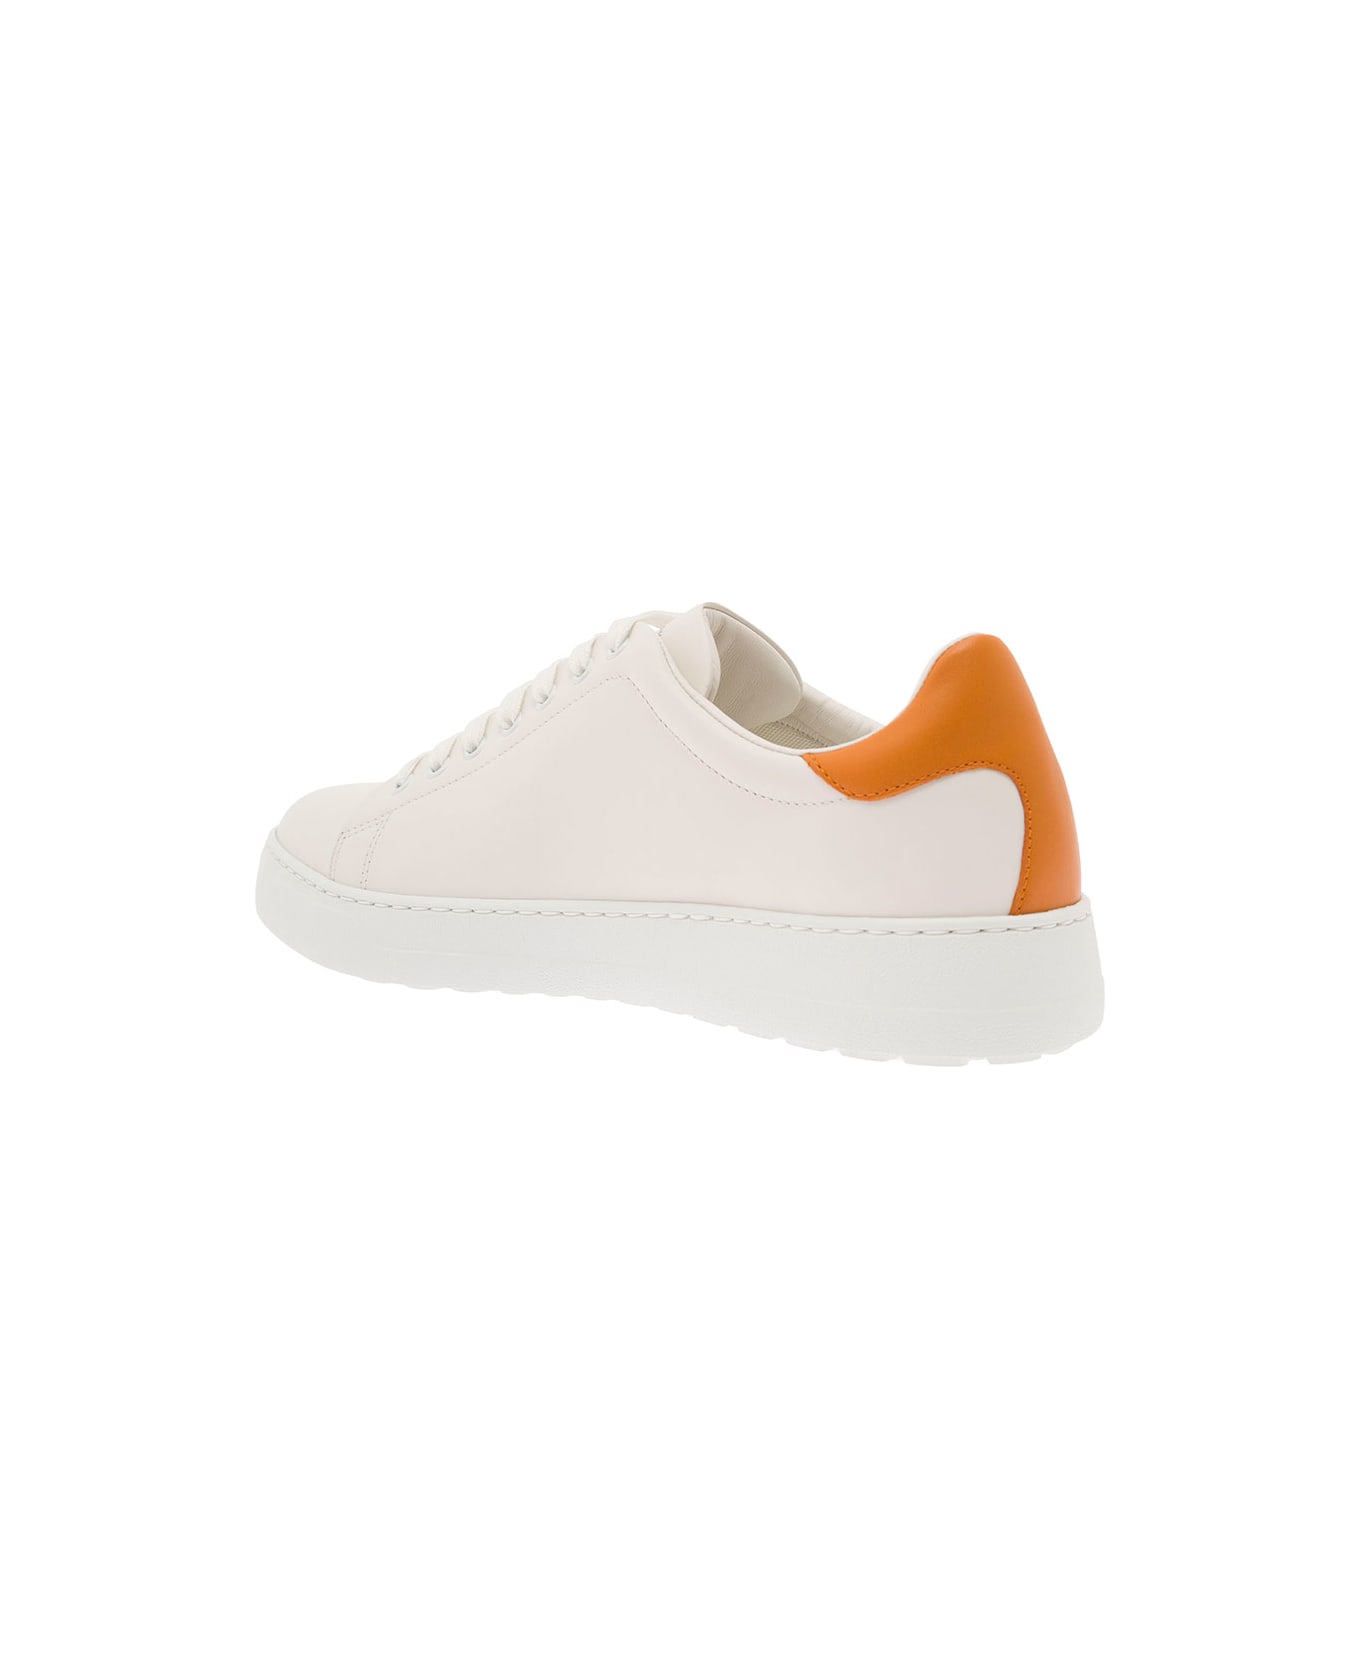 Ferragamo White Low Top Sneakers With Gancini Logo Print In Leather Man - White